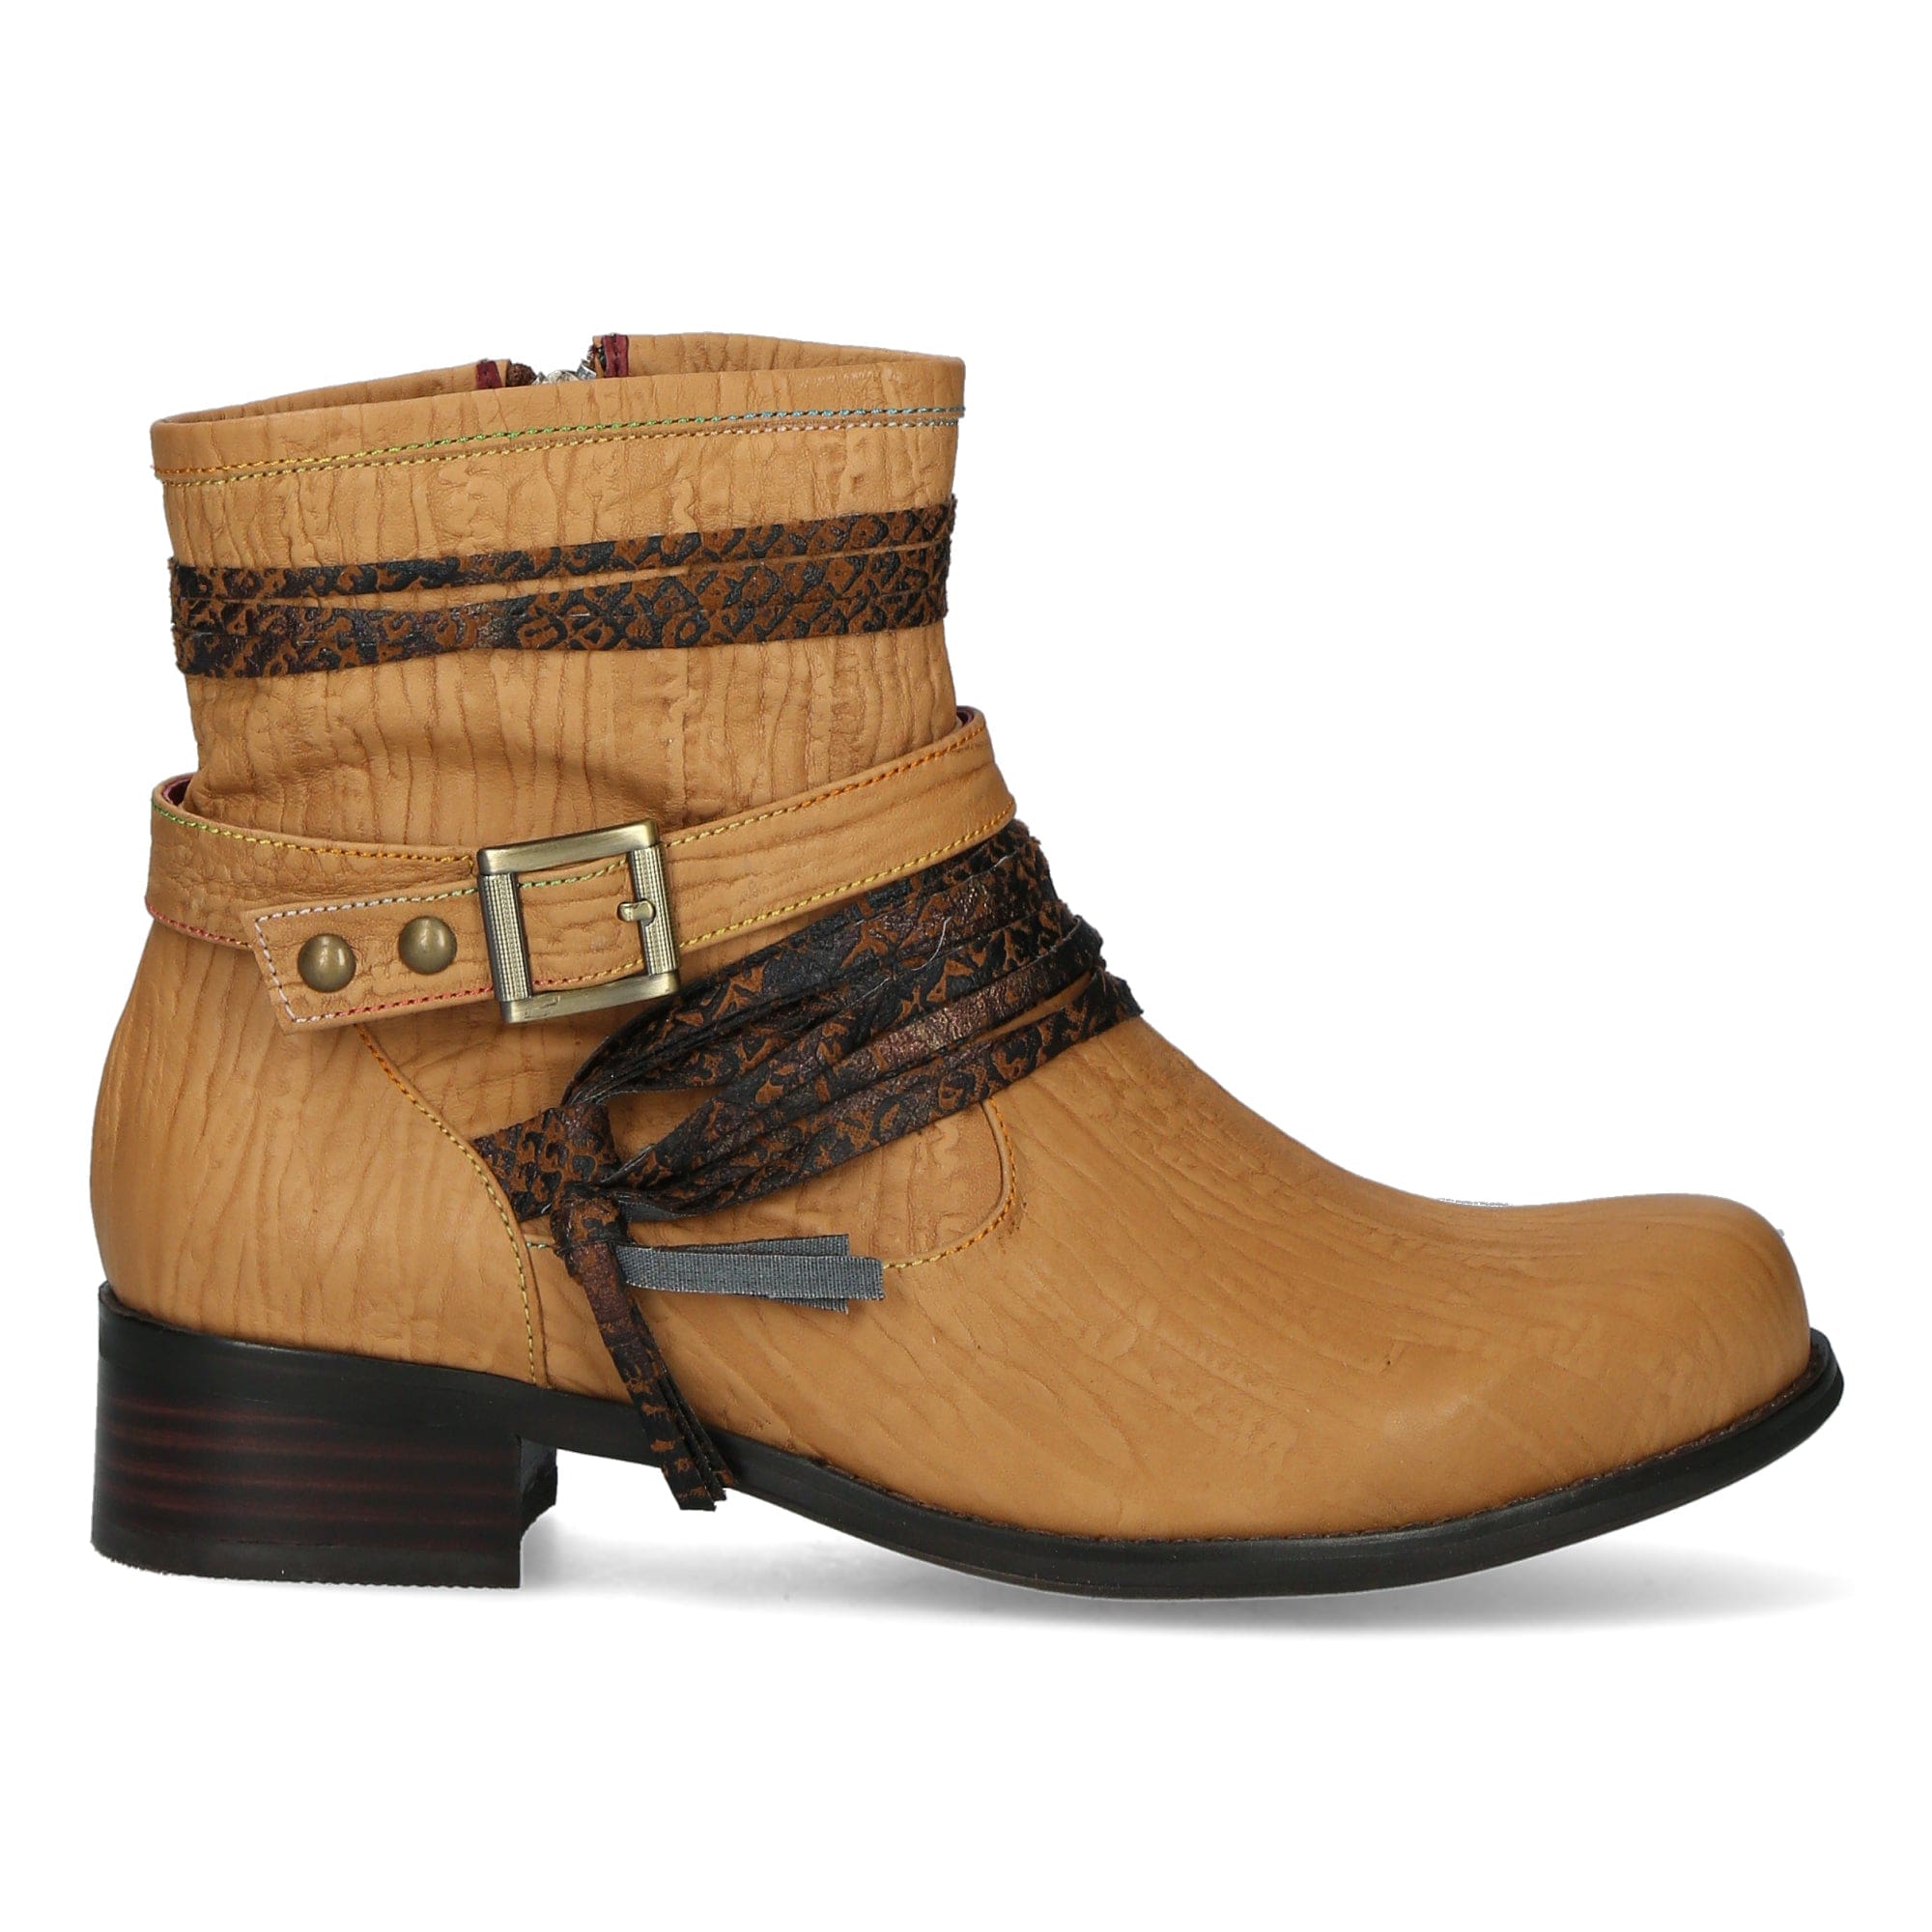 Chaussures COLOMBE 02 - 35 / Moutard - Boots